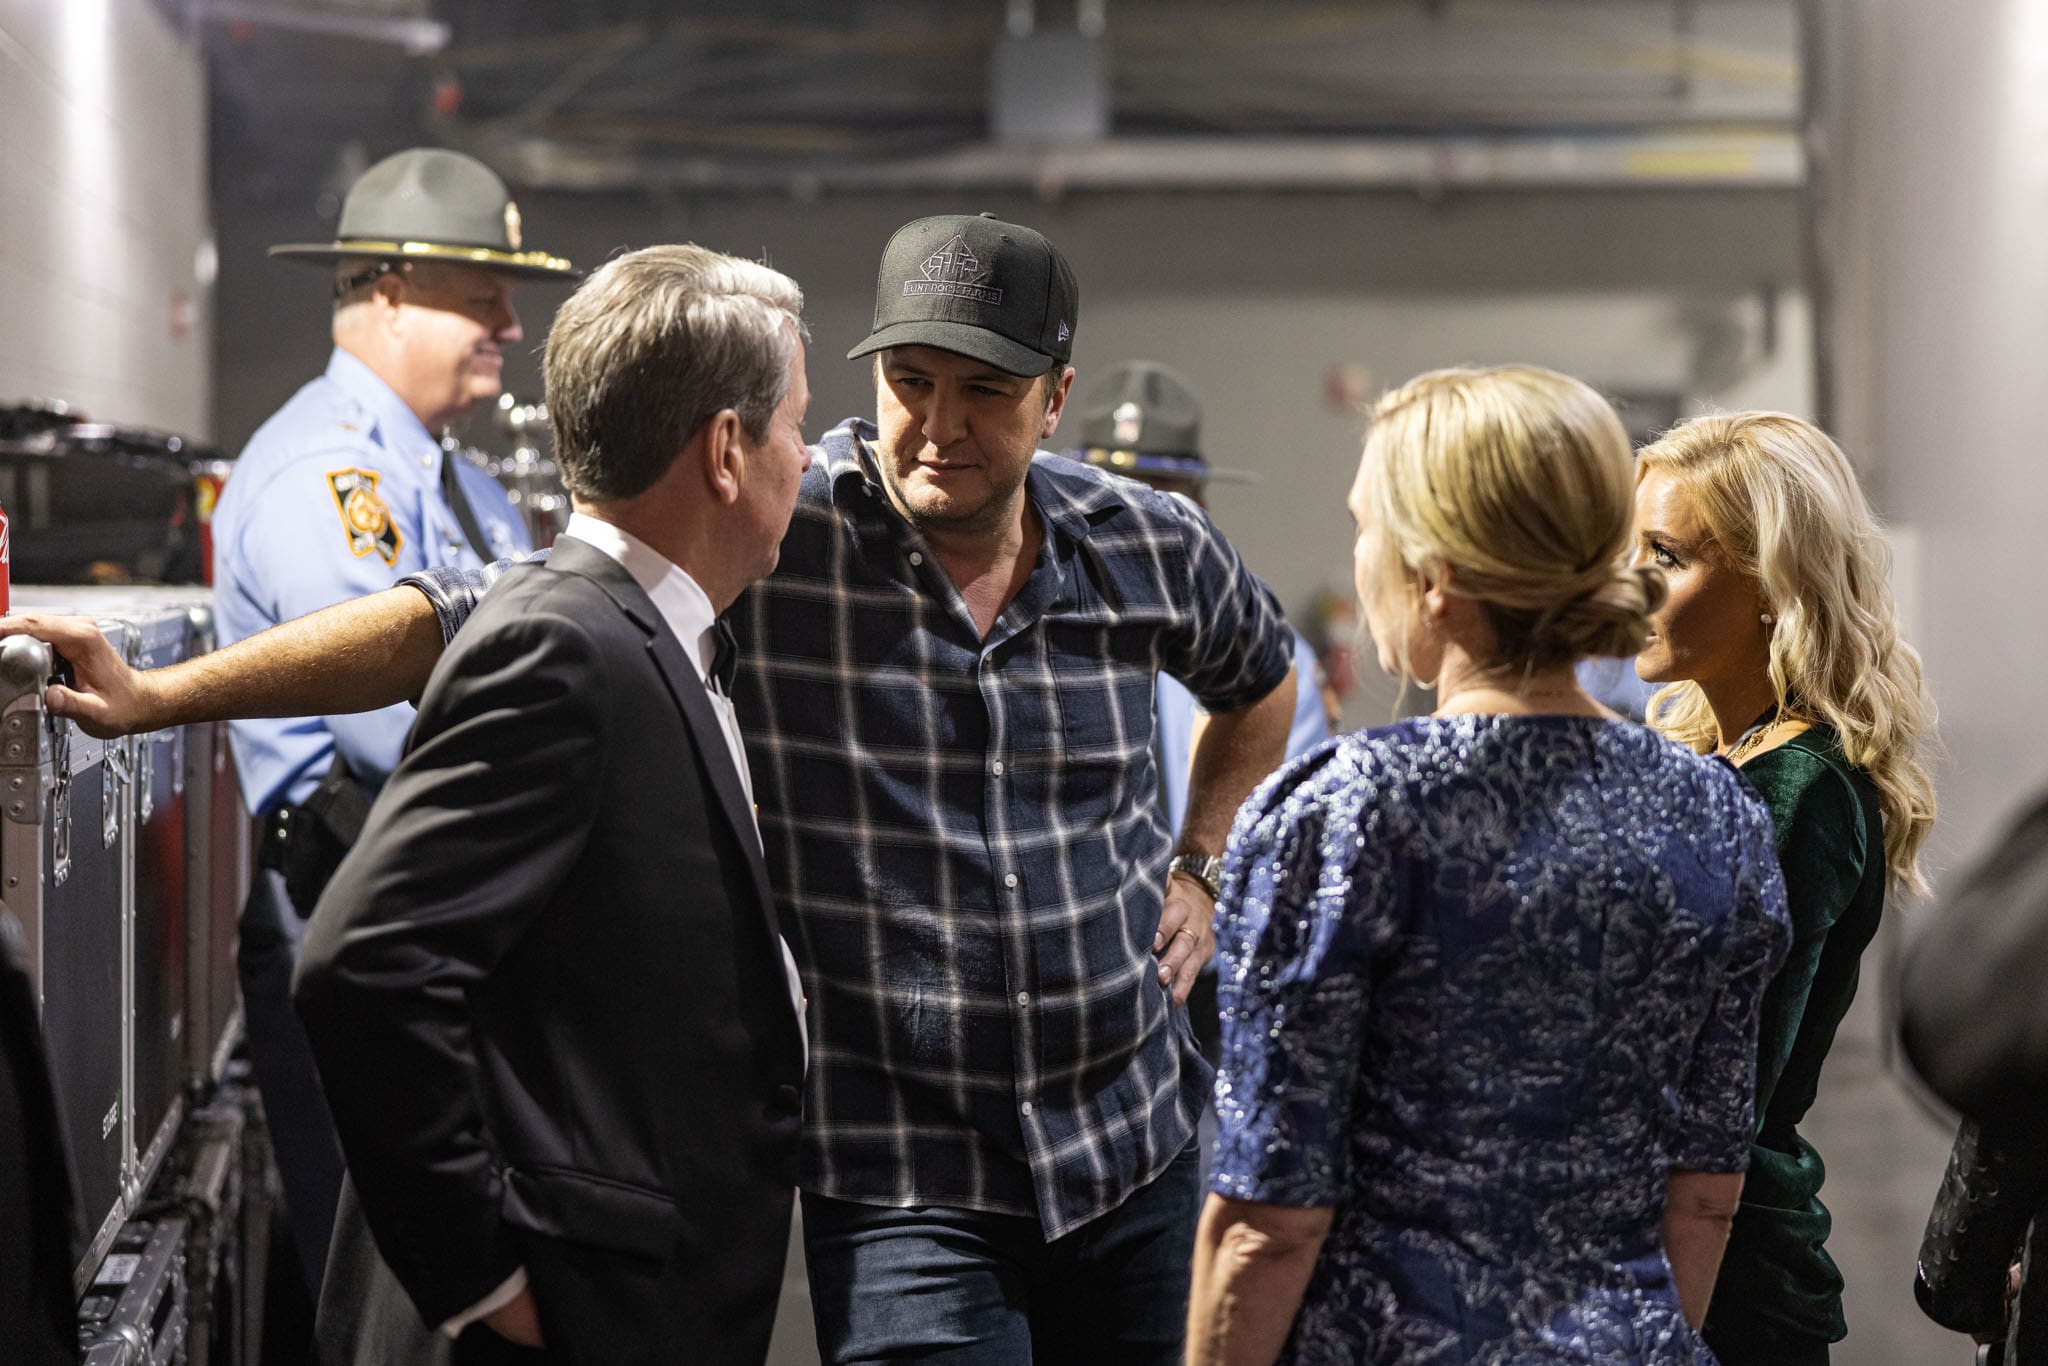 Luke-bryan-backstage-with-governor-brian-kemp-first-lady-marty-kemp-and-wife-caroline-boyer-with-georgia-state-trooper-in-background